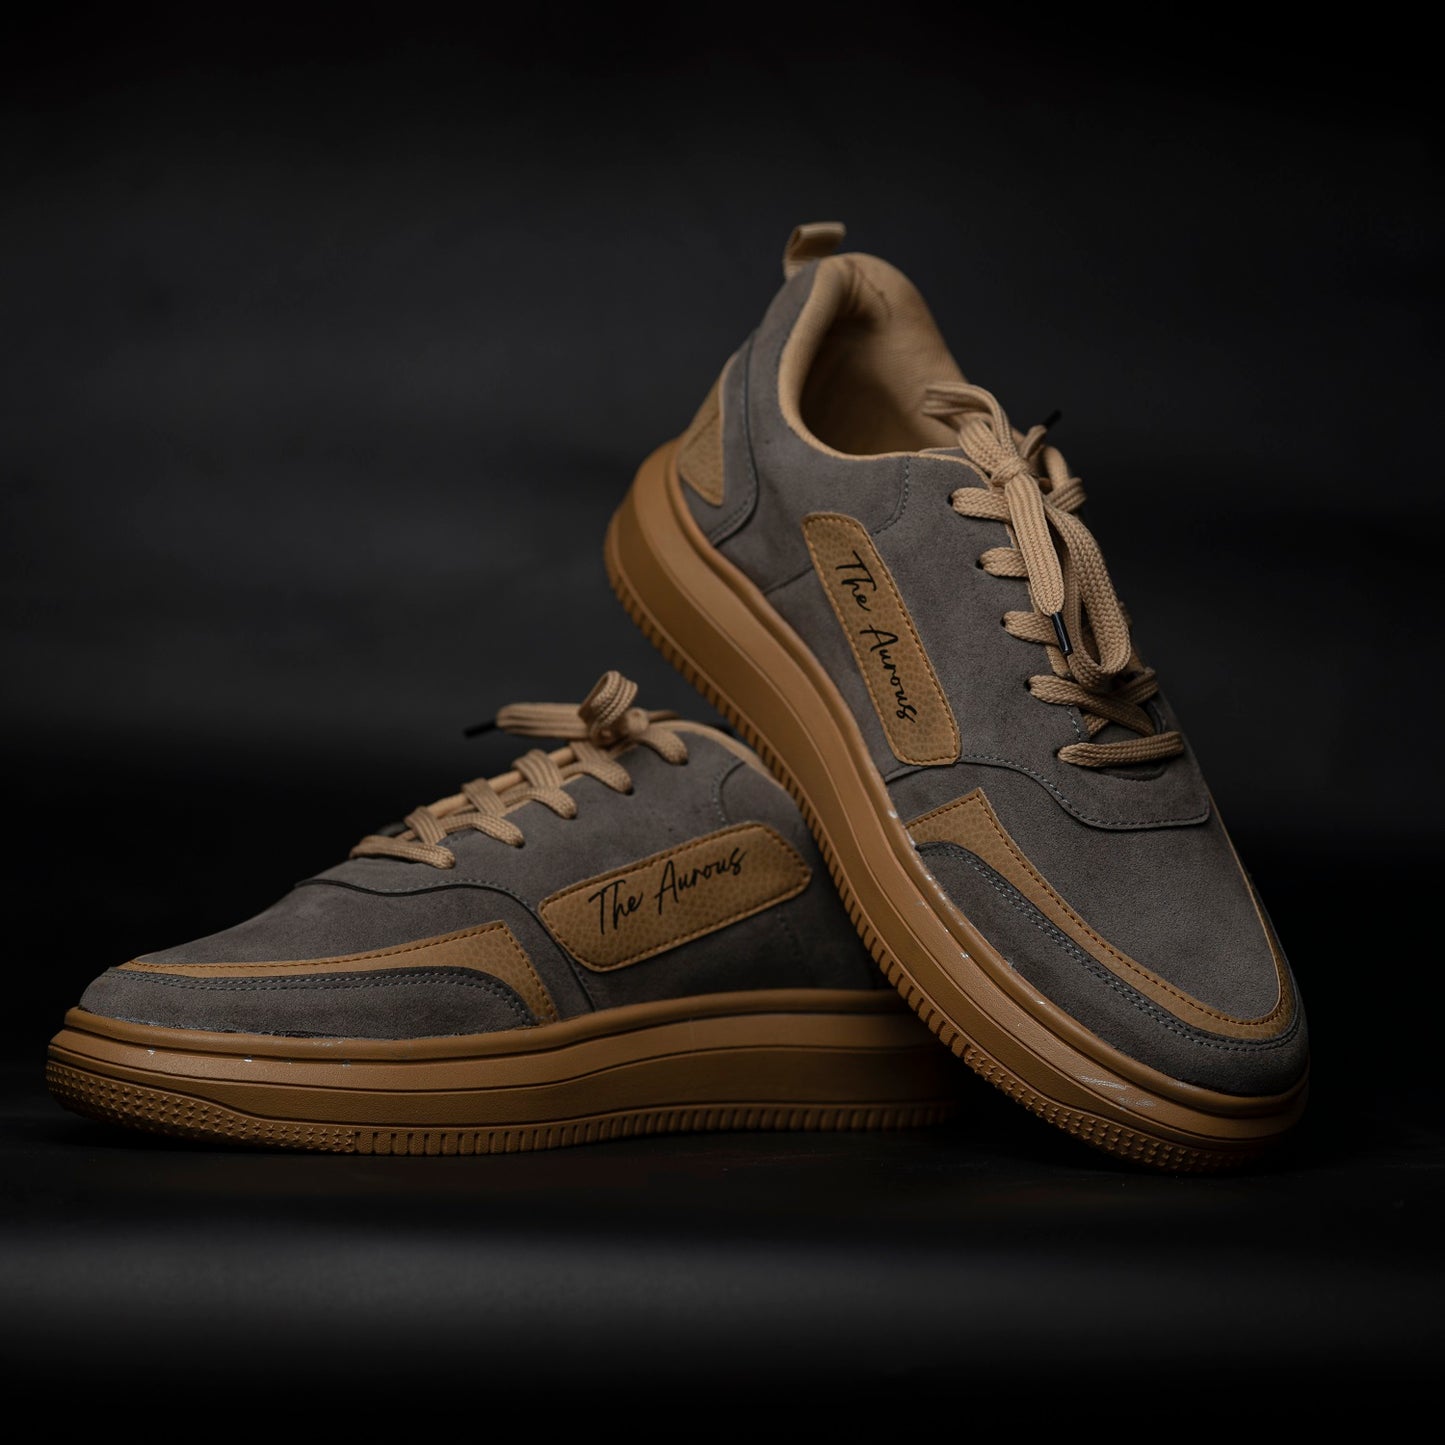 The Aurous Windstorm Laceup Sneakers - All Colors